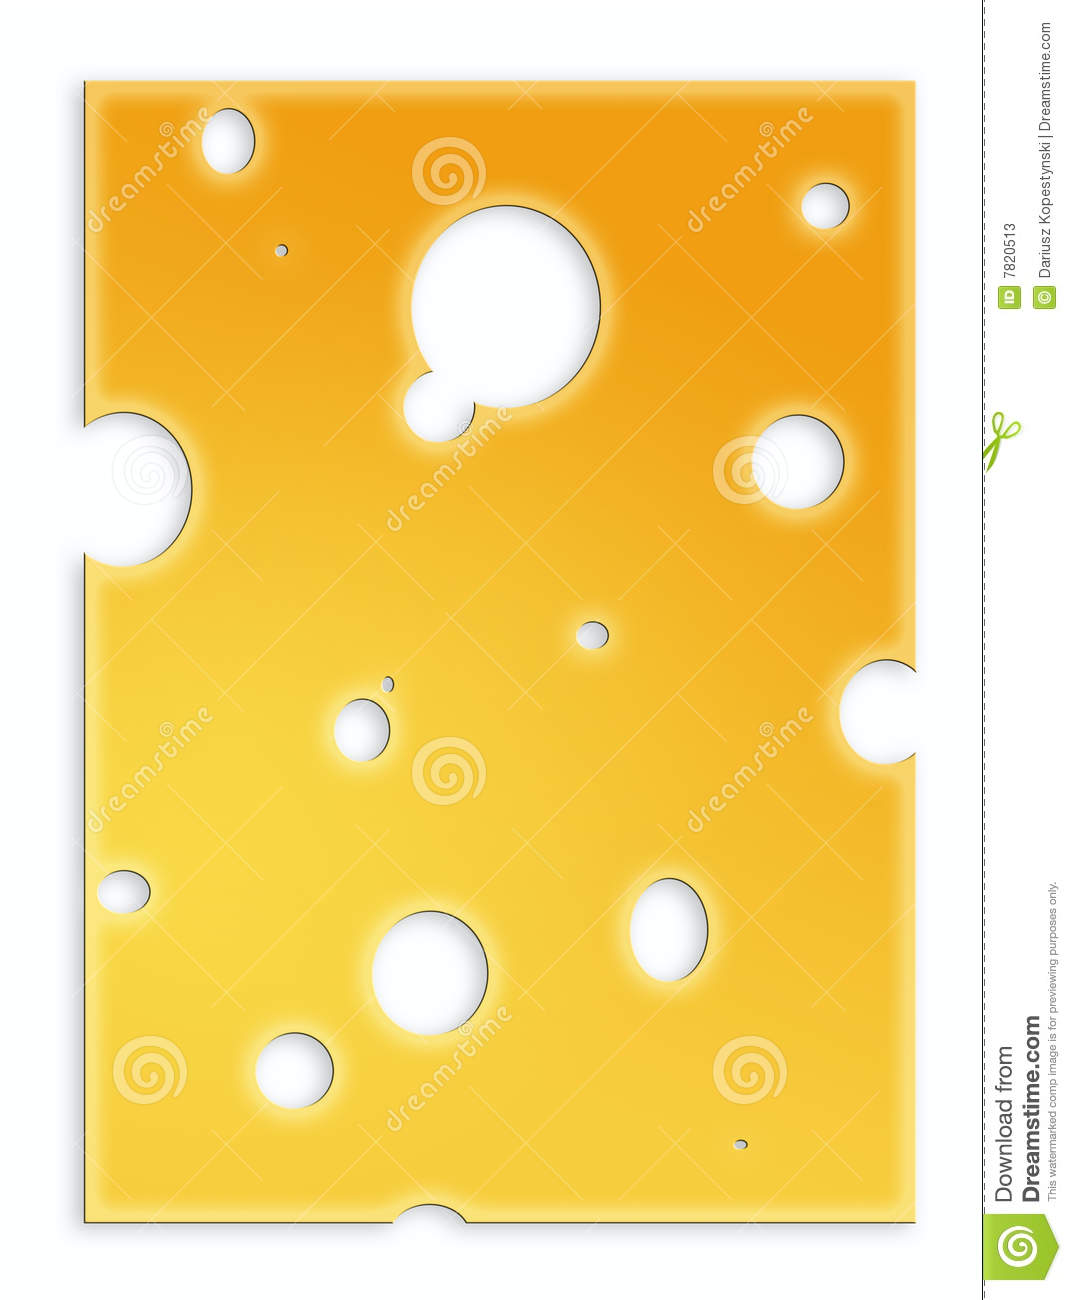 Slice Of Yellow Cheese  Illustration On White Background